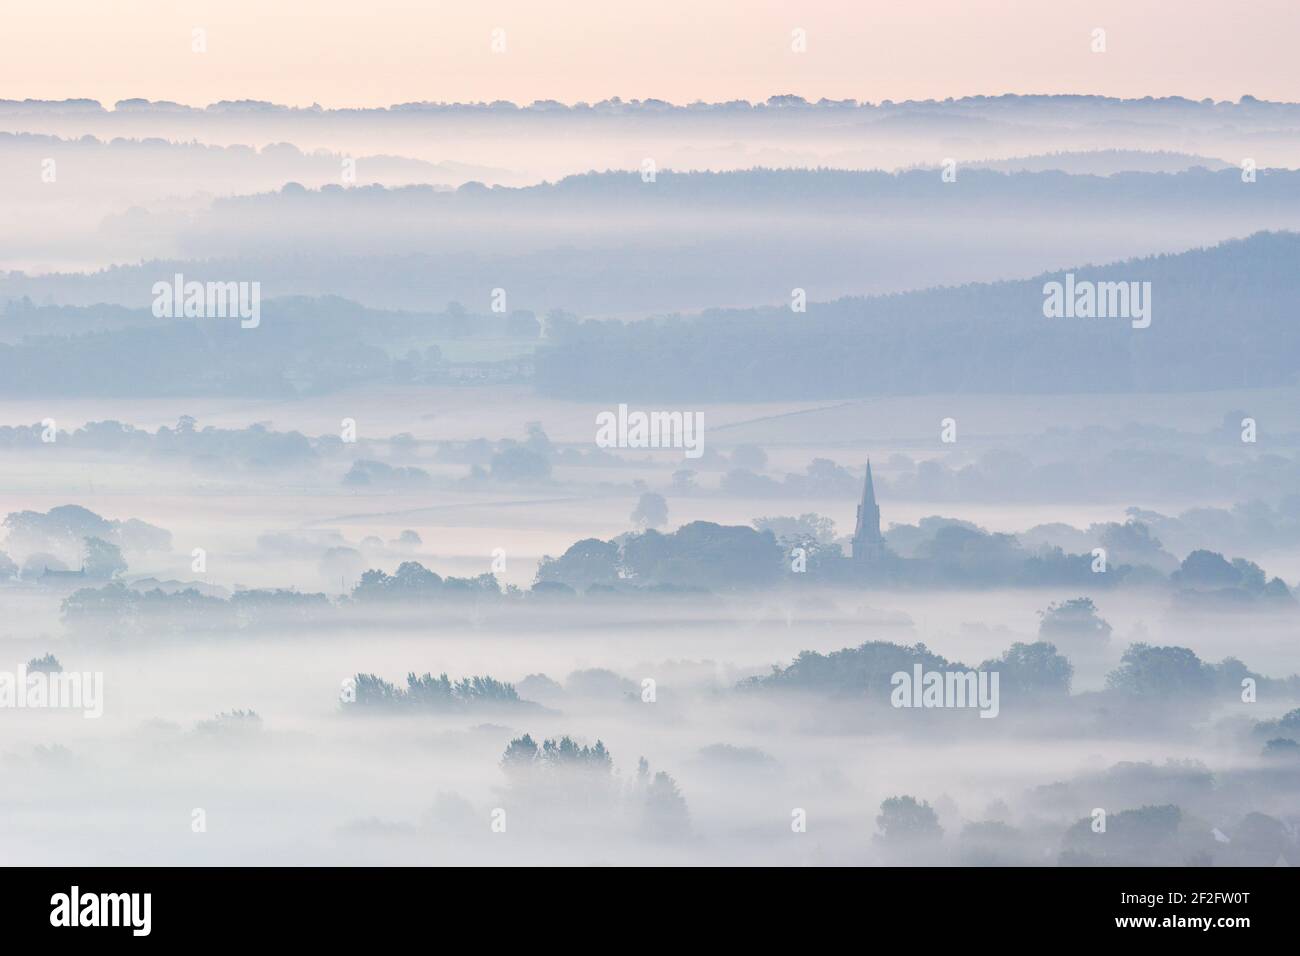 The spire of St Barnabas Church in Weeton, Yorkshire, is prominent above the misty layers of the landscape at dawn on a peaceful autumn morning. Stock Photo